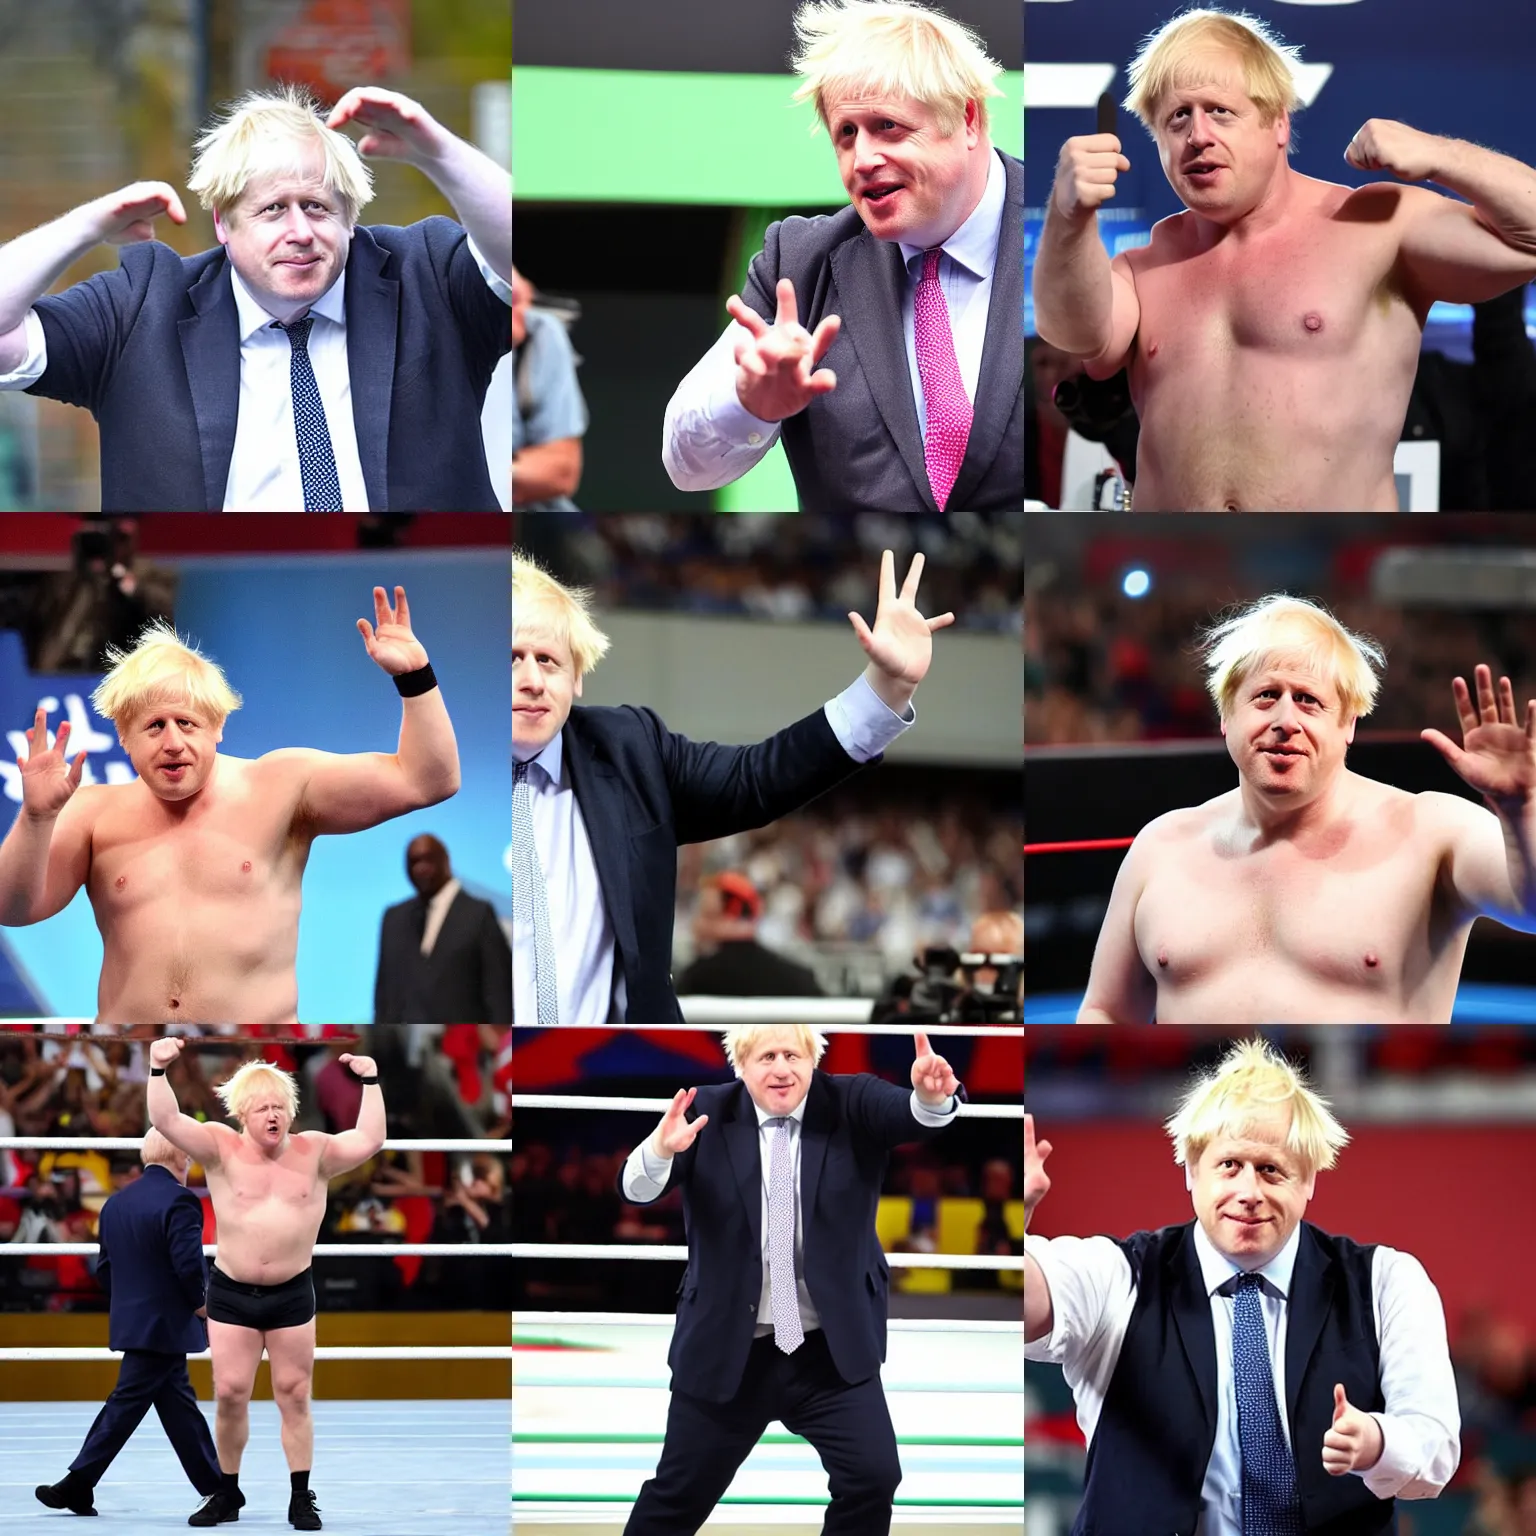 Prompt: boris johnson wearing a cap as a muscular wwe wrestler. he is waving hello to the camera